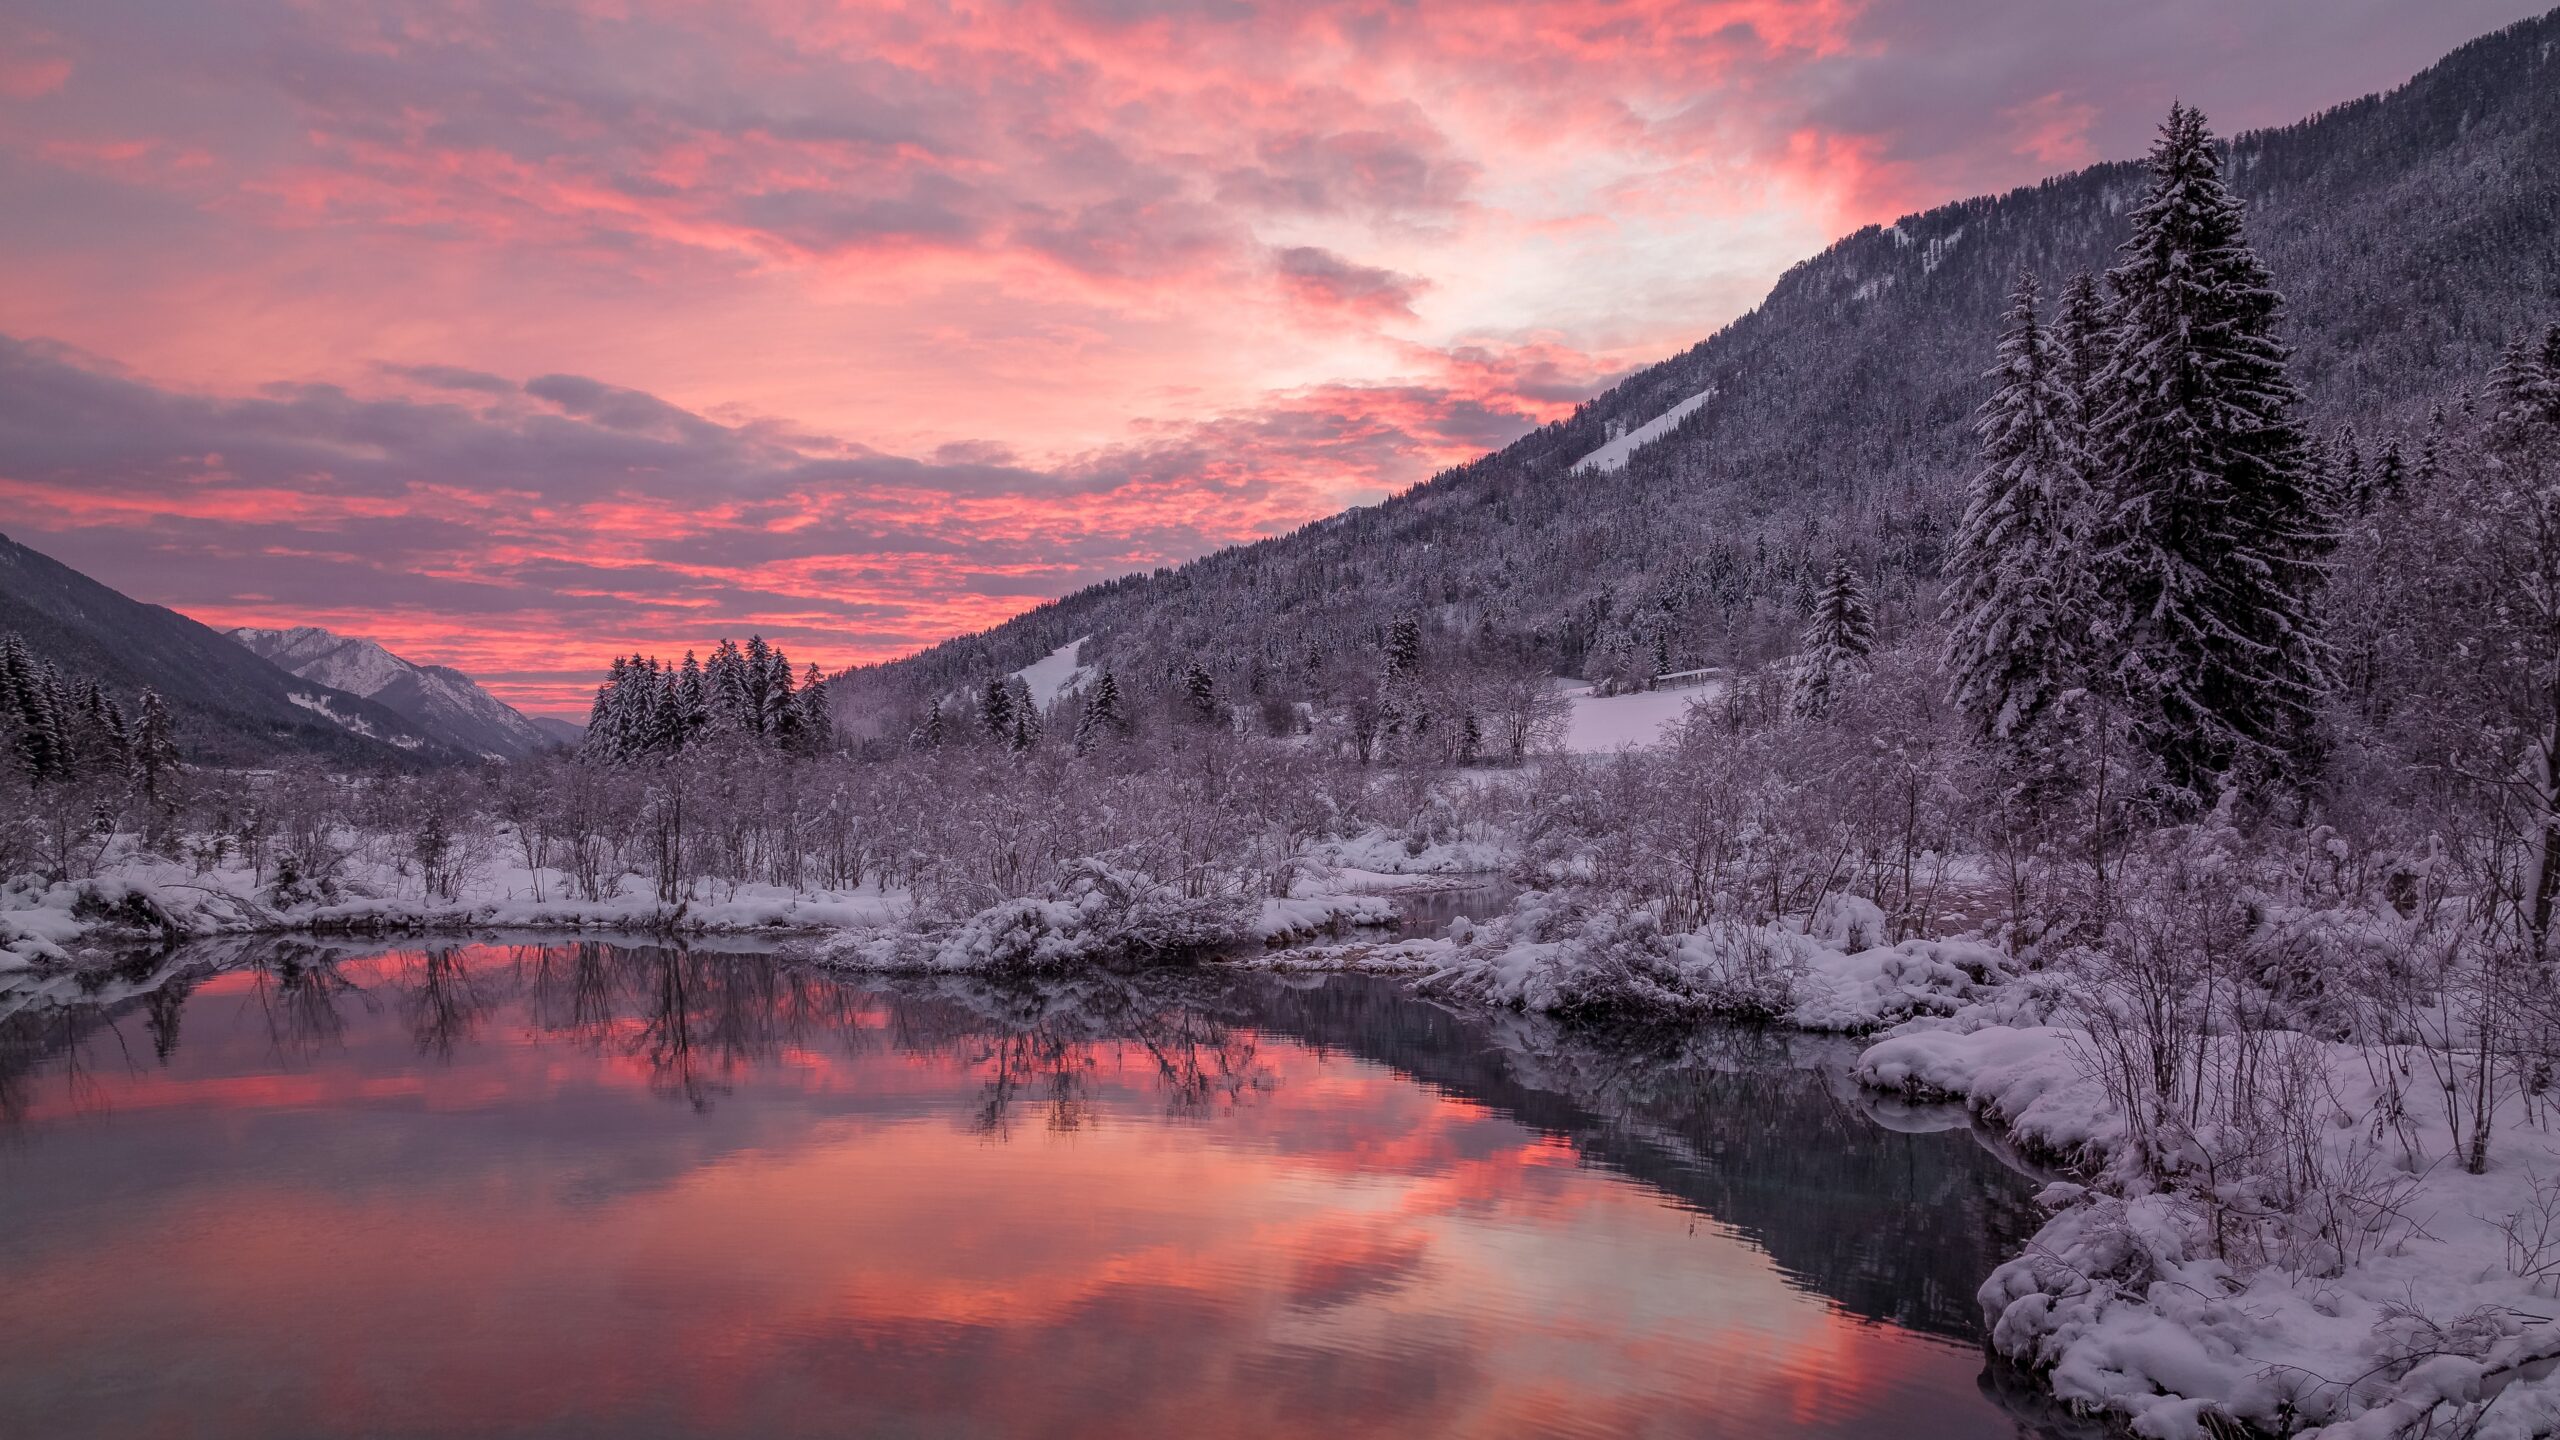 Vivid winter sunrise by the Zelenci lake in the Alps. Photo by Ales Krivec